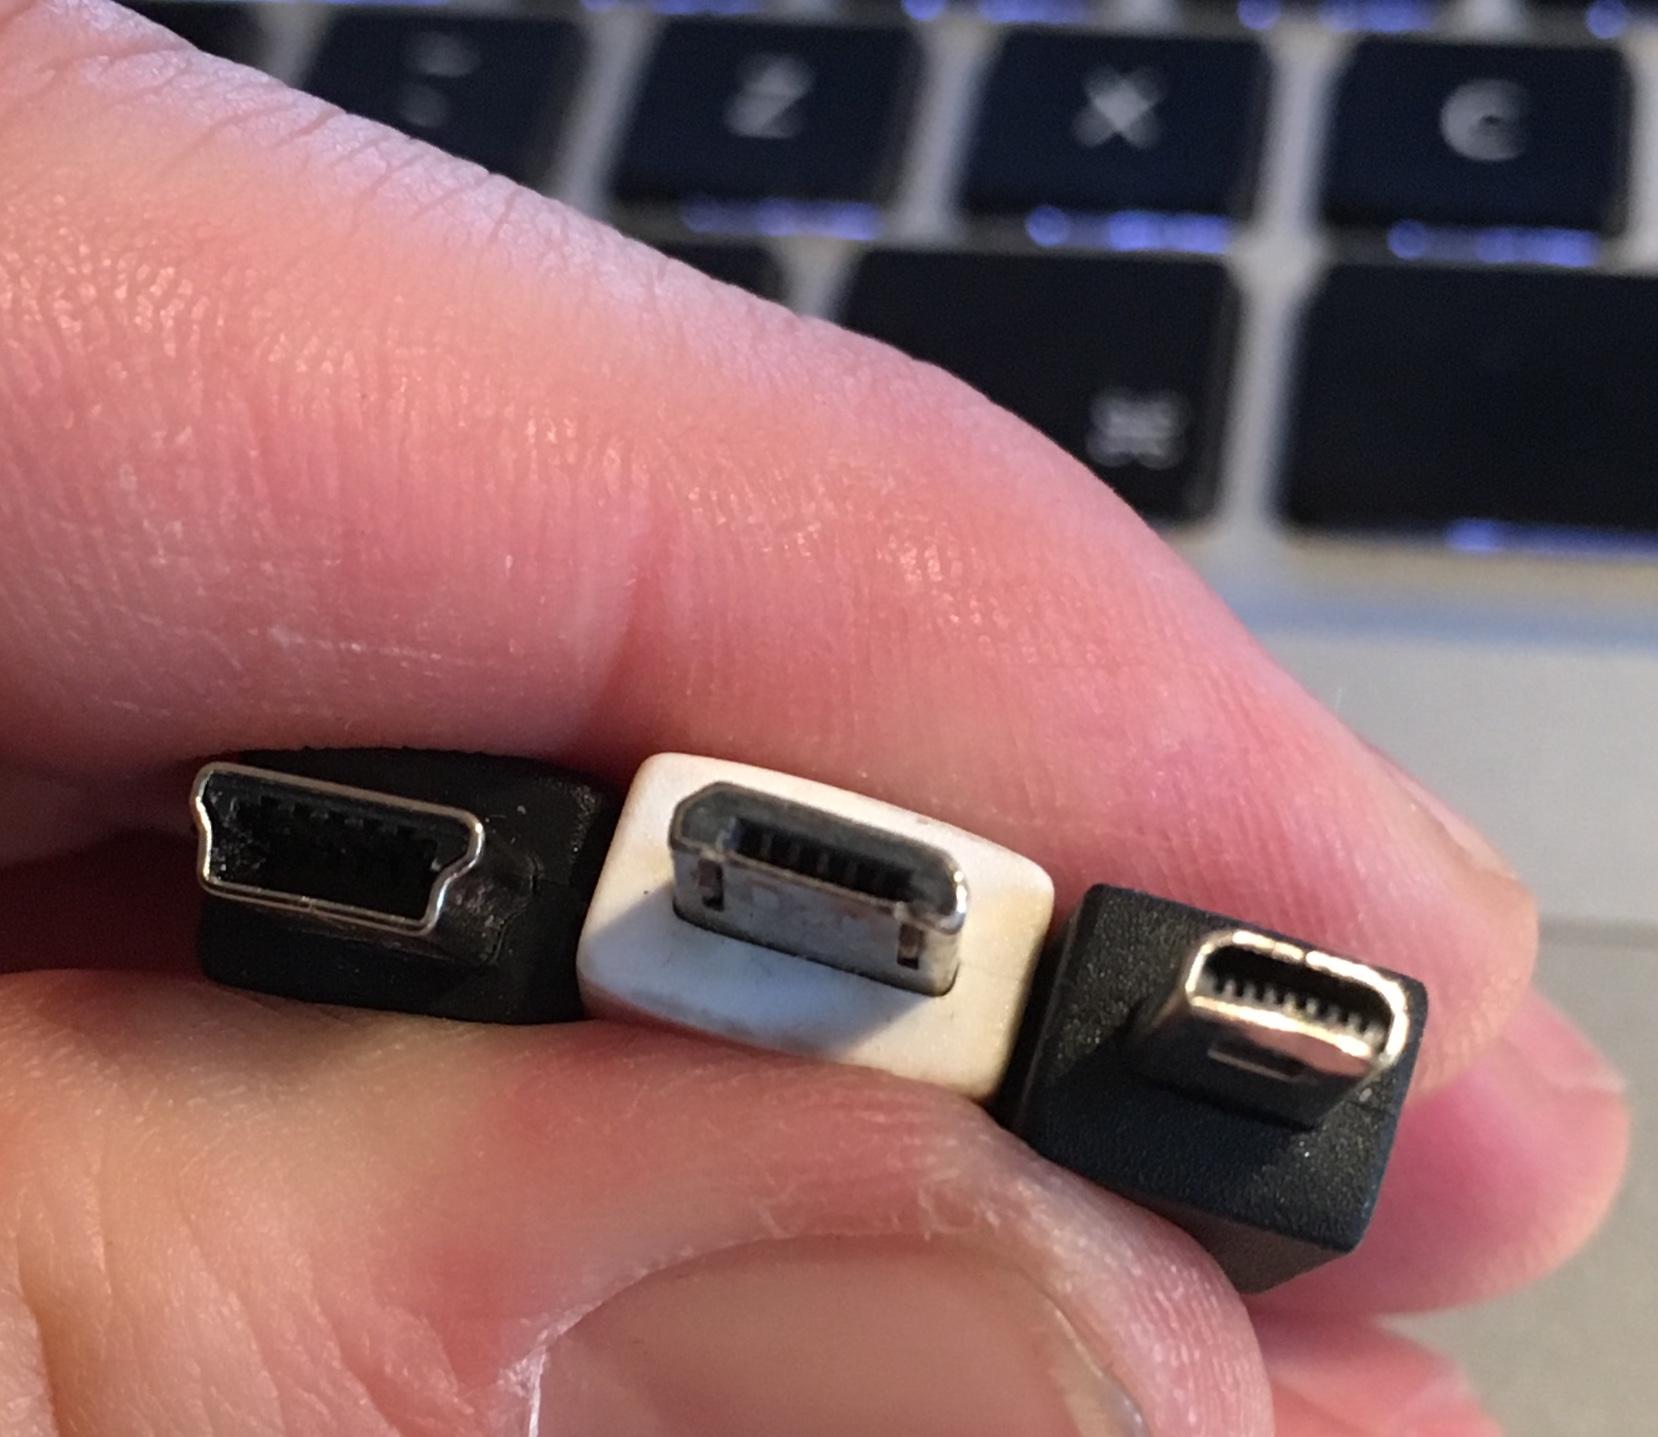 Identifying charging cable connector type - Genius Bar Discussions